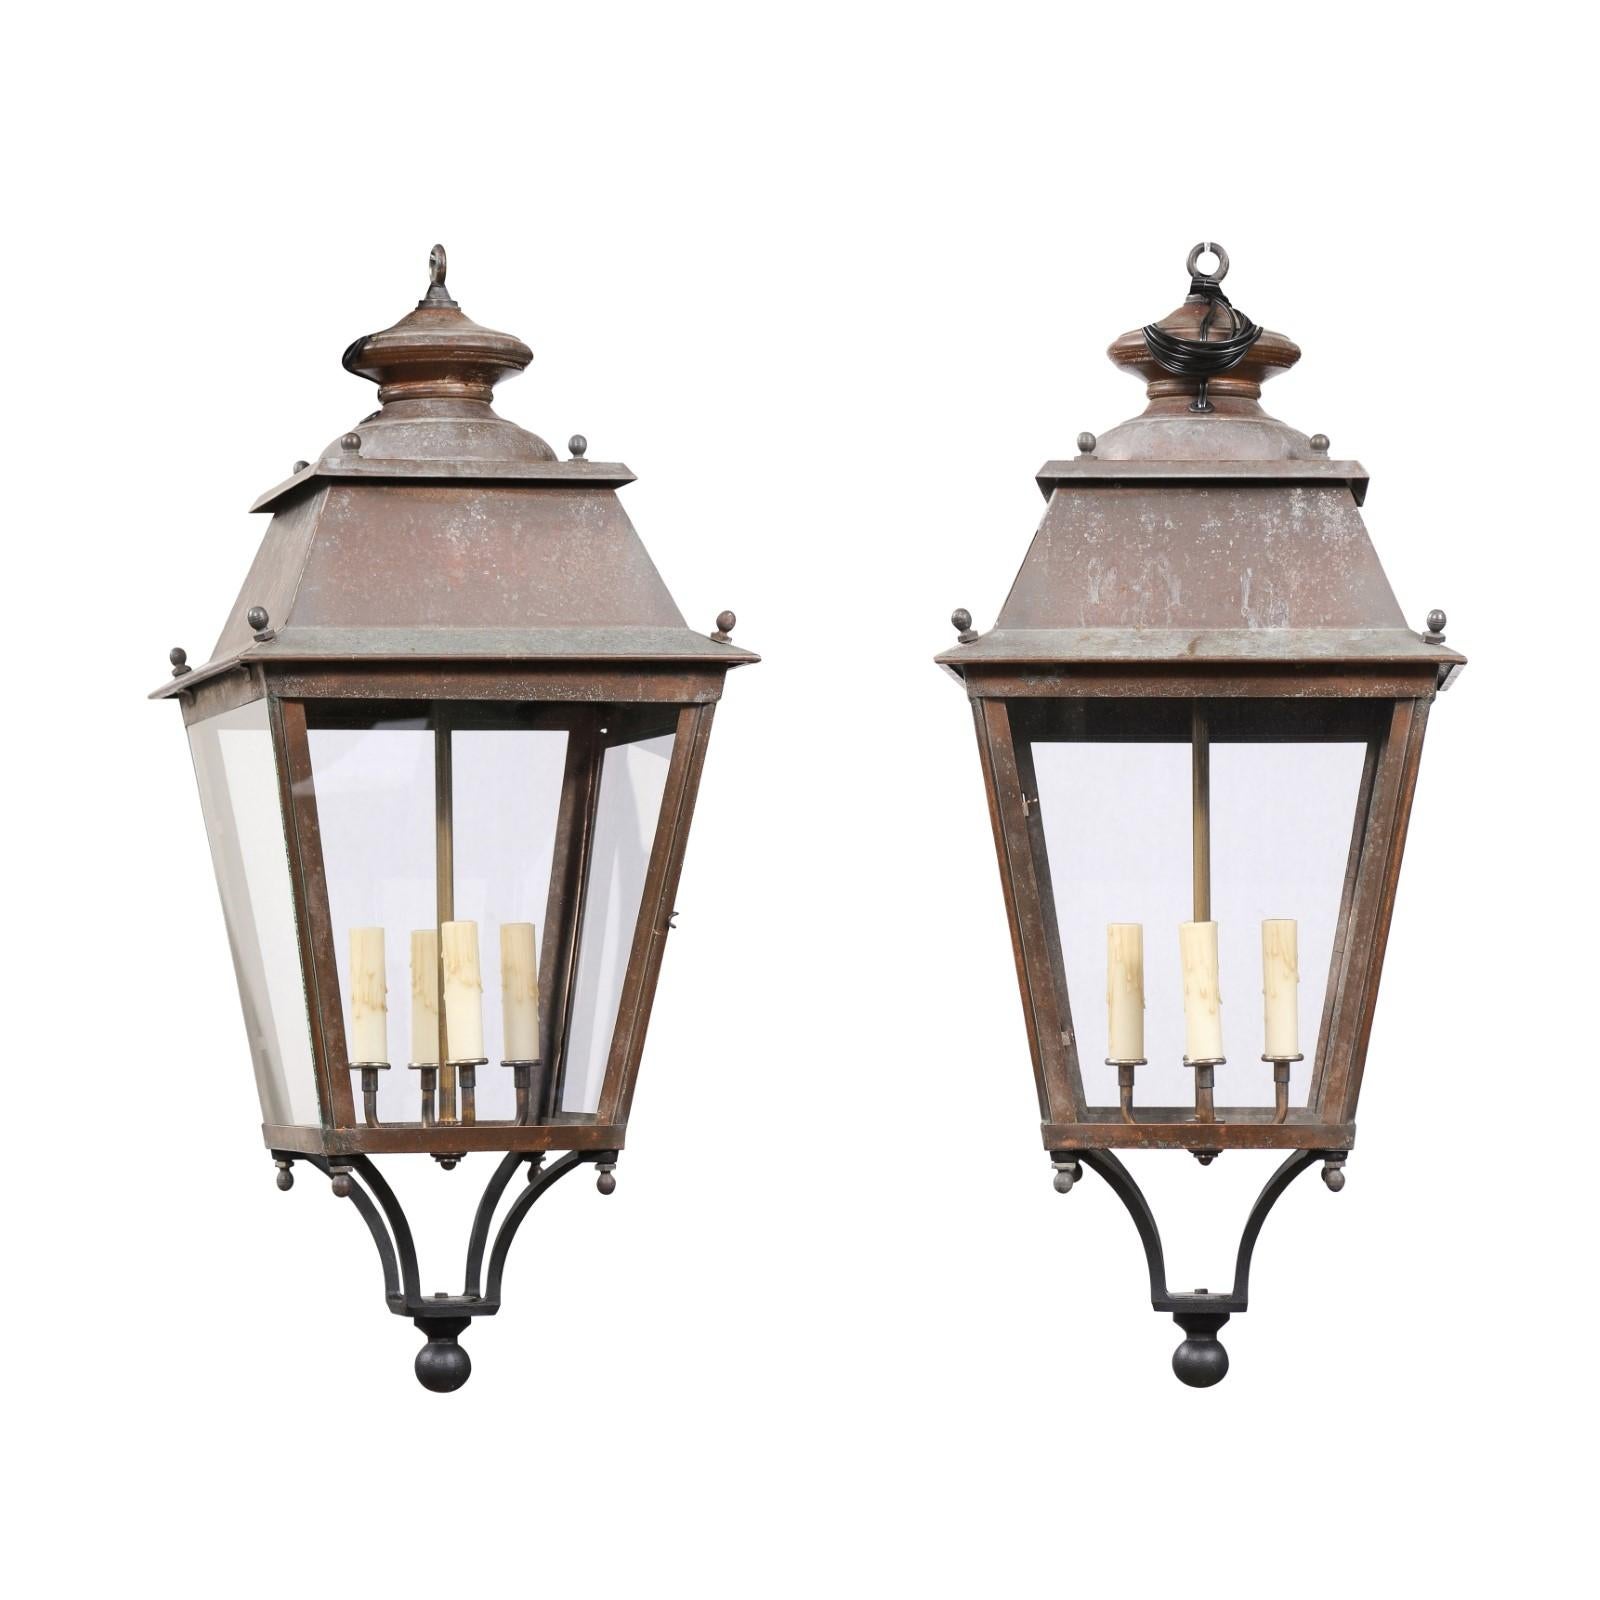 Two French copper lanterns from the 20th century, with four lights, glass panels, finial and rustic character. Immerse yourself in the rustic charm and timeless elegance of these two French copper lanterns from the 20th century. Their weathered